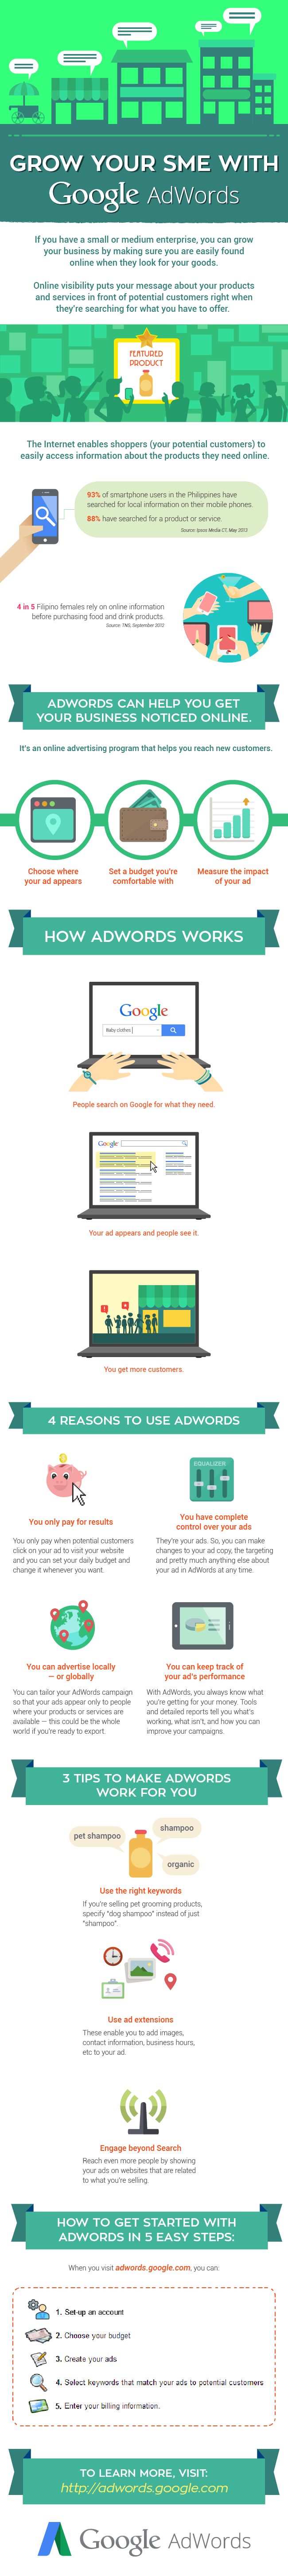 AdWords-Infographic-Final